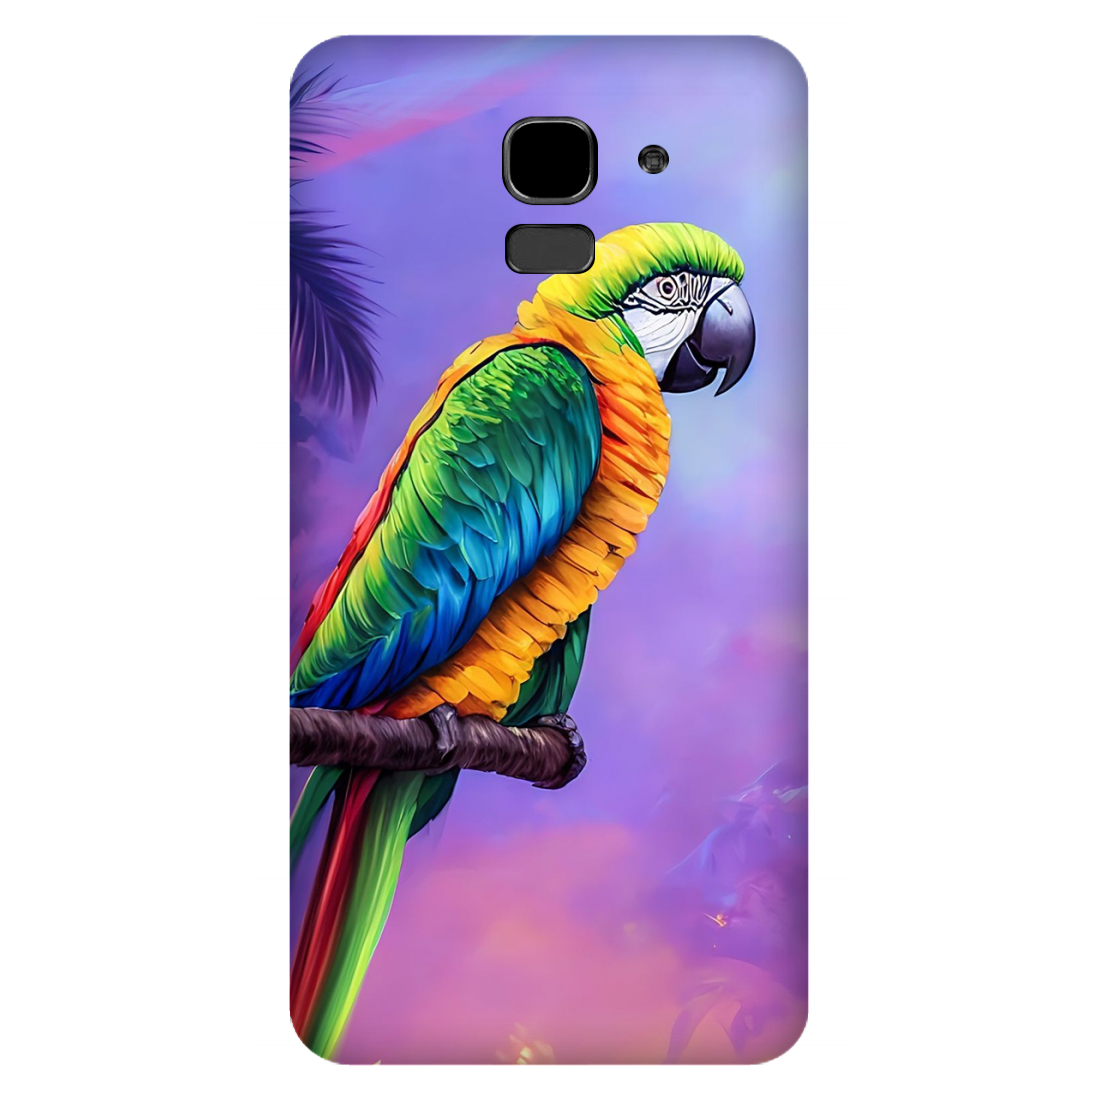 Vibrant Parrot in an Ethereal Atmosphere Case Samsung Galaxy J6